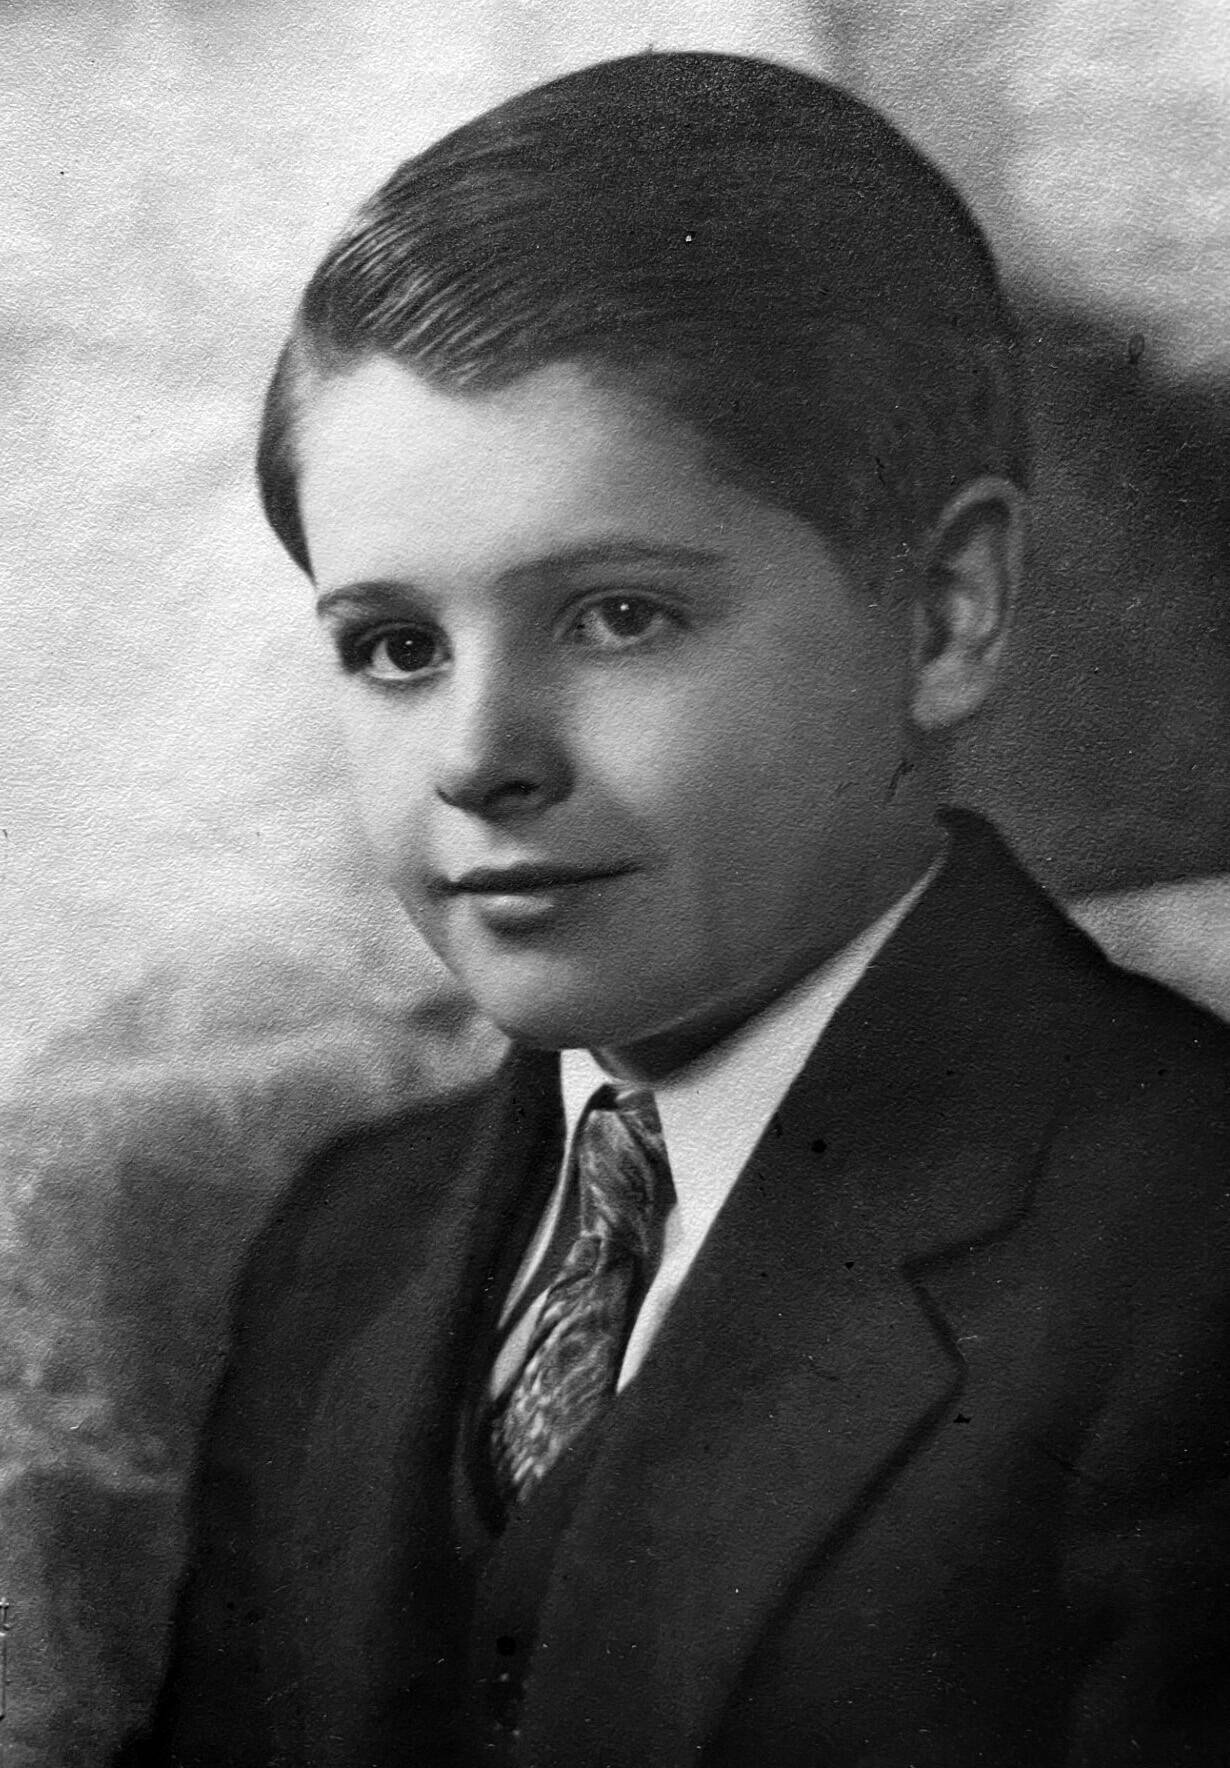 Photo courtesy of the Lancashire Family Collection
The “poor little rich boy,” Larry Lancashire, at about age eight, near Toledo, Ohio.